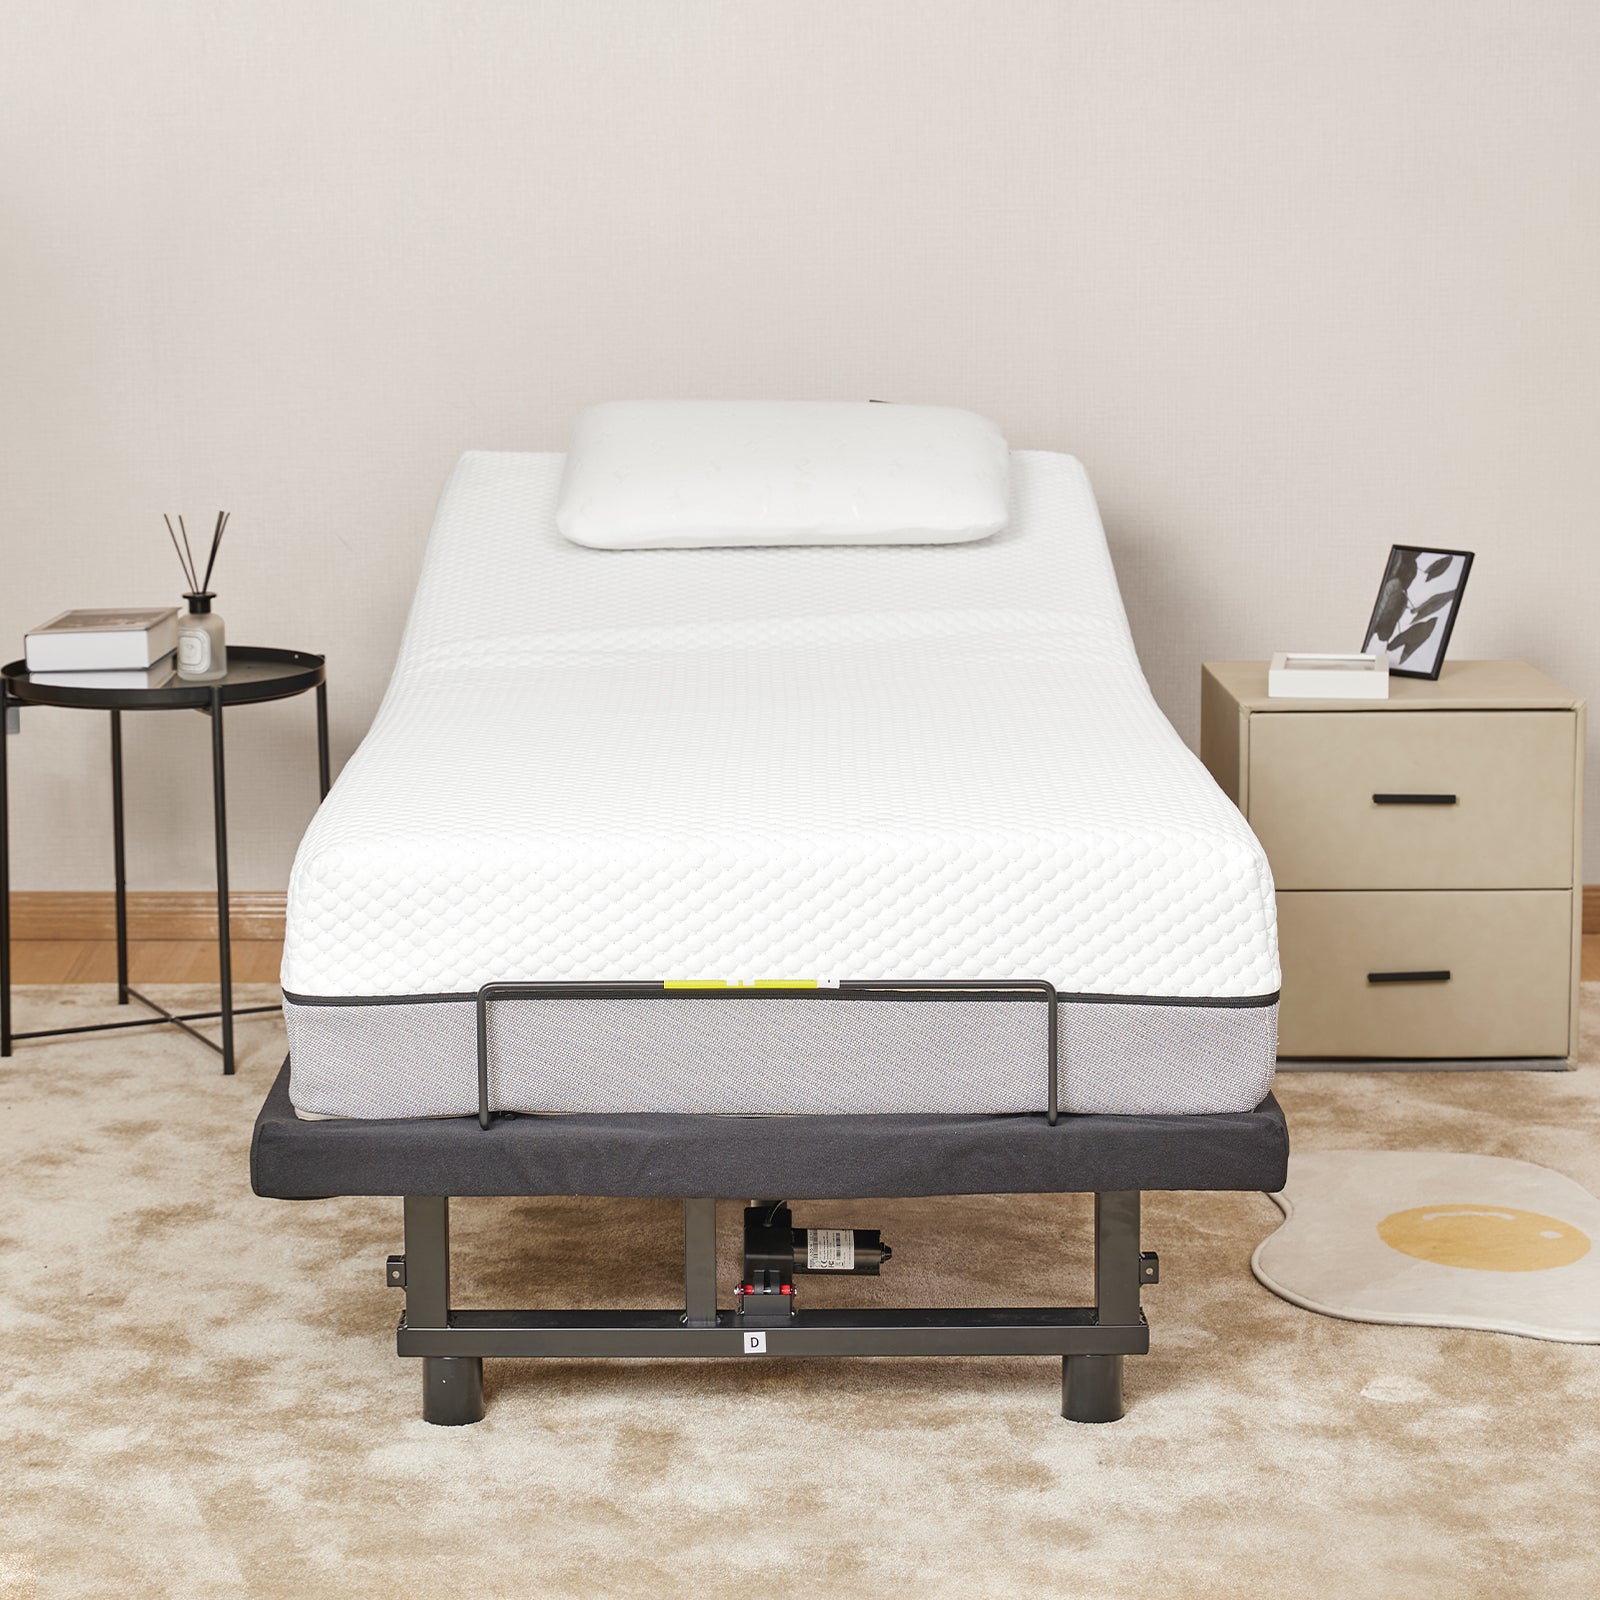 🆓🚛 Adjustable Bed Base Frame, Head and Foot Incline, Quiet Motor, Twin Xl Size, Zero Gravity